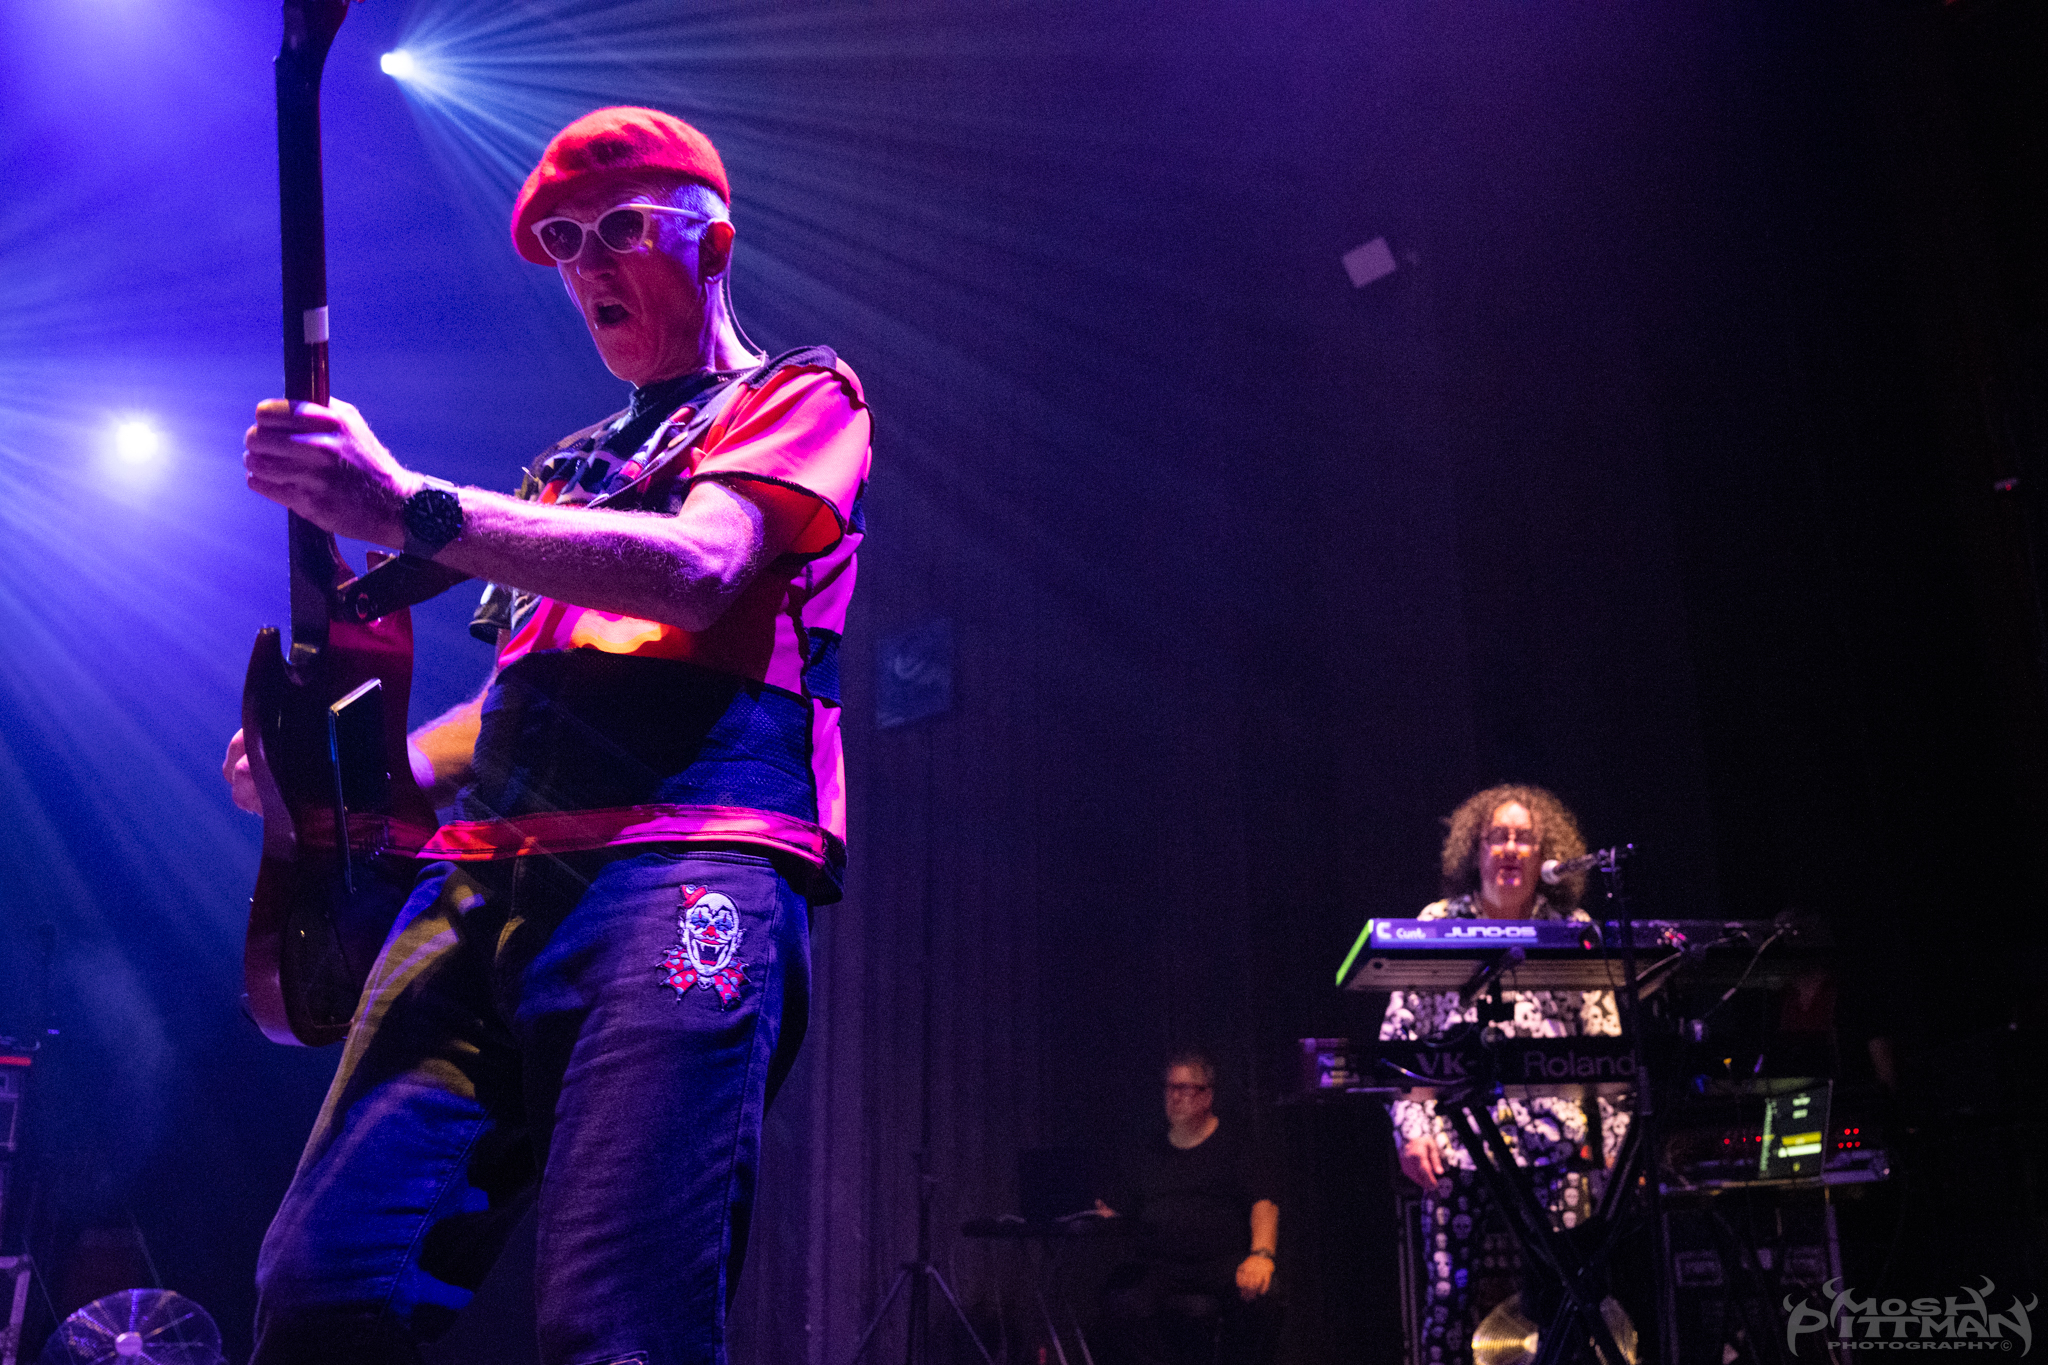 Gallery: The Damned + The Hard-Ons, Enmore Theatre, Sydney